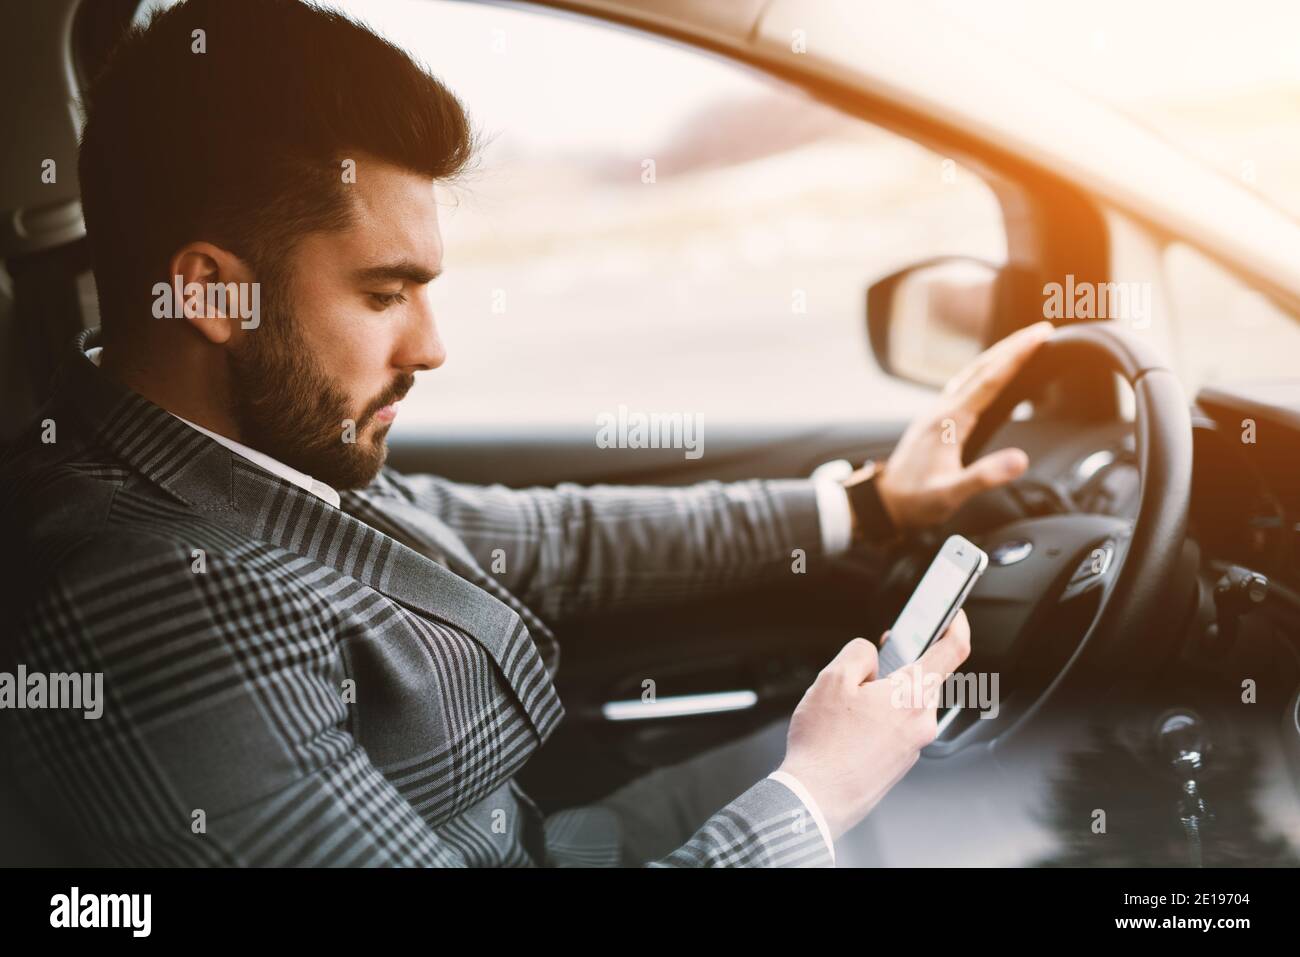 Handsome suited man with beard texting while driving a fancy car on a street. Stock Photo